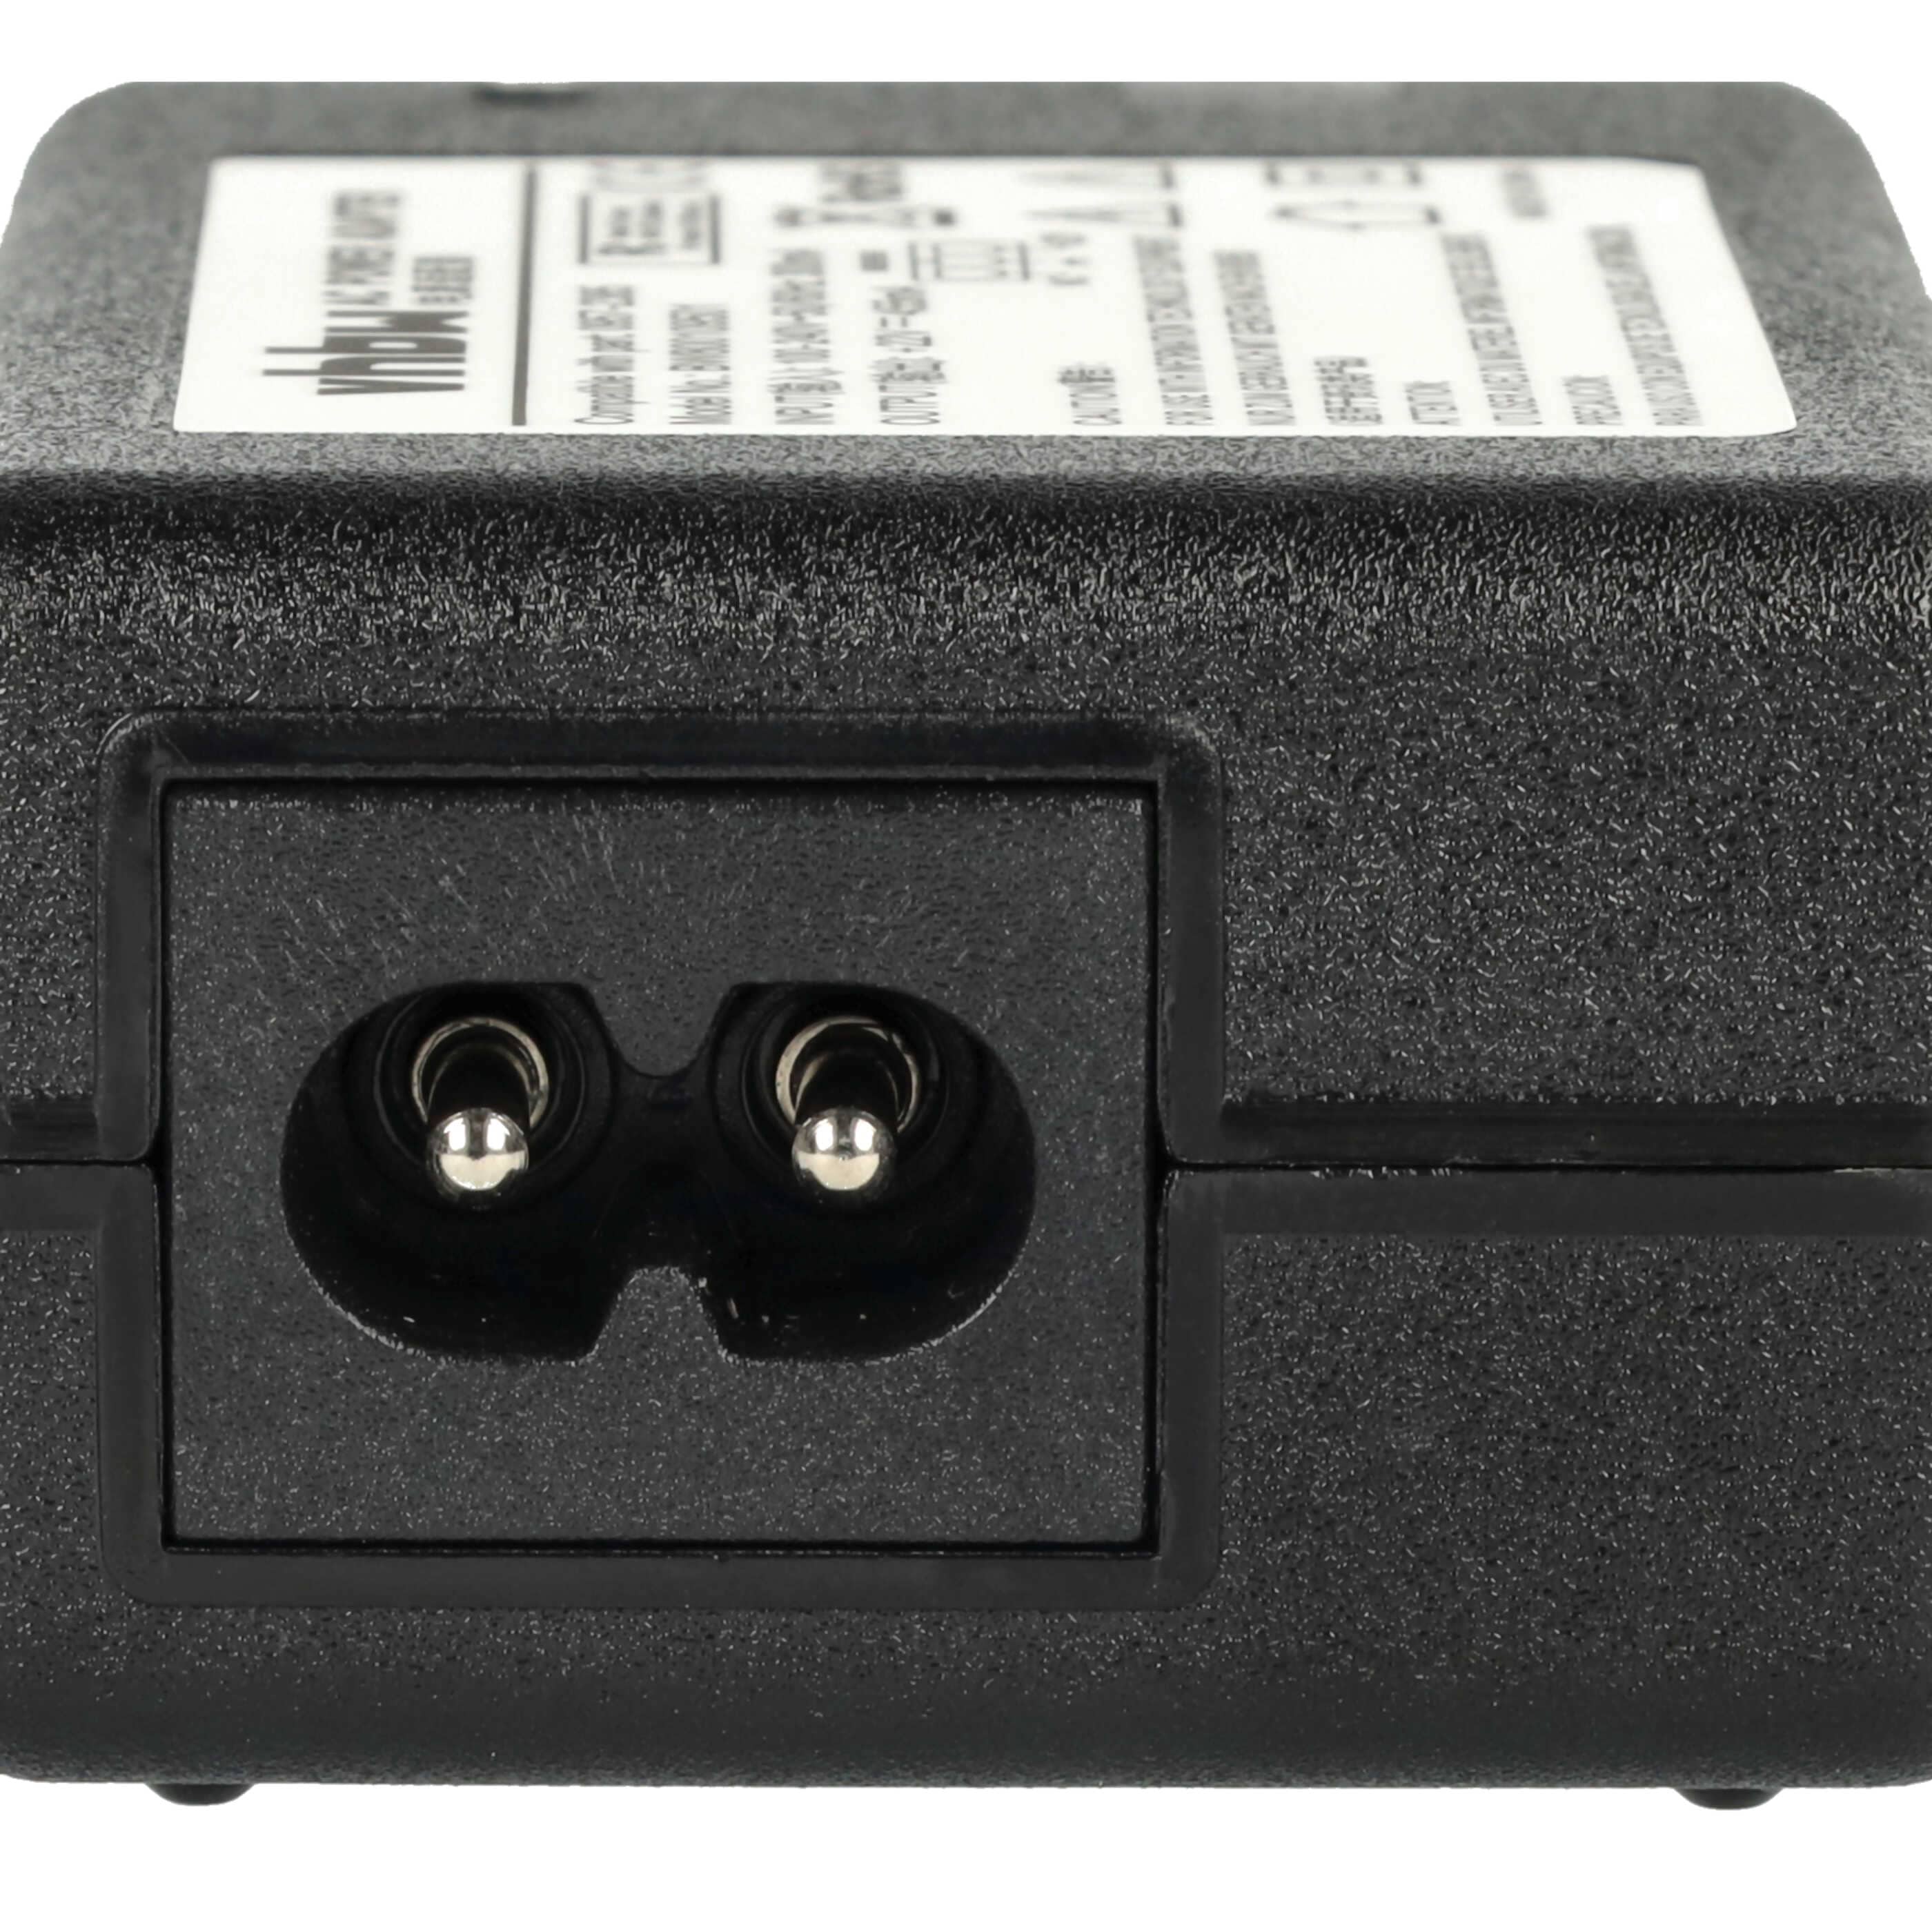 Mains Power Adapter replaces HP 0957-2403, 0957-2385 for Printer - 200 cm